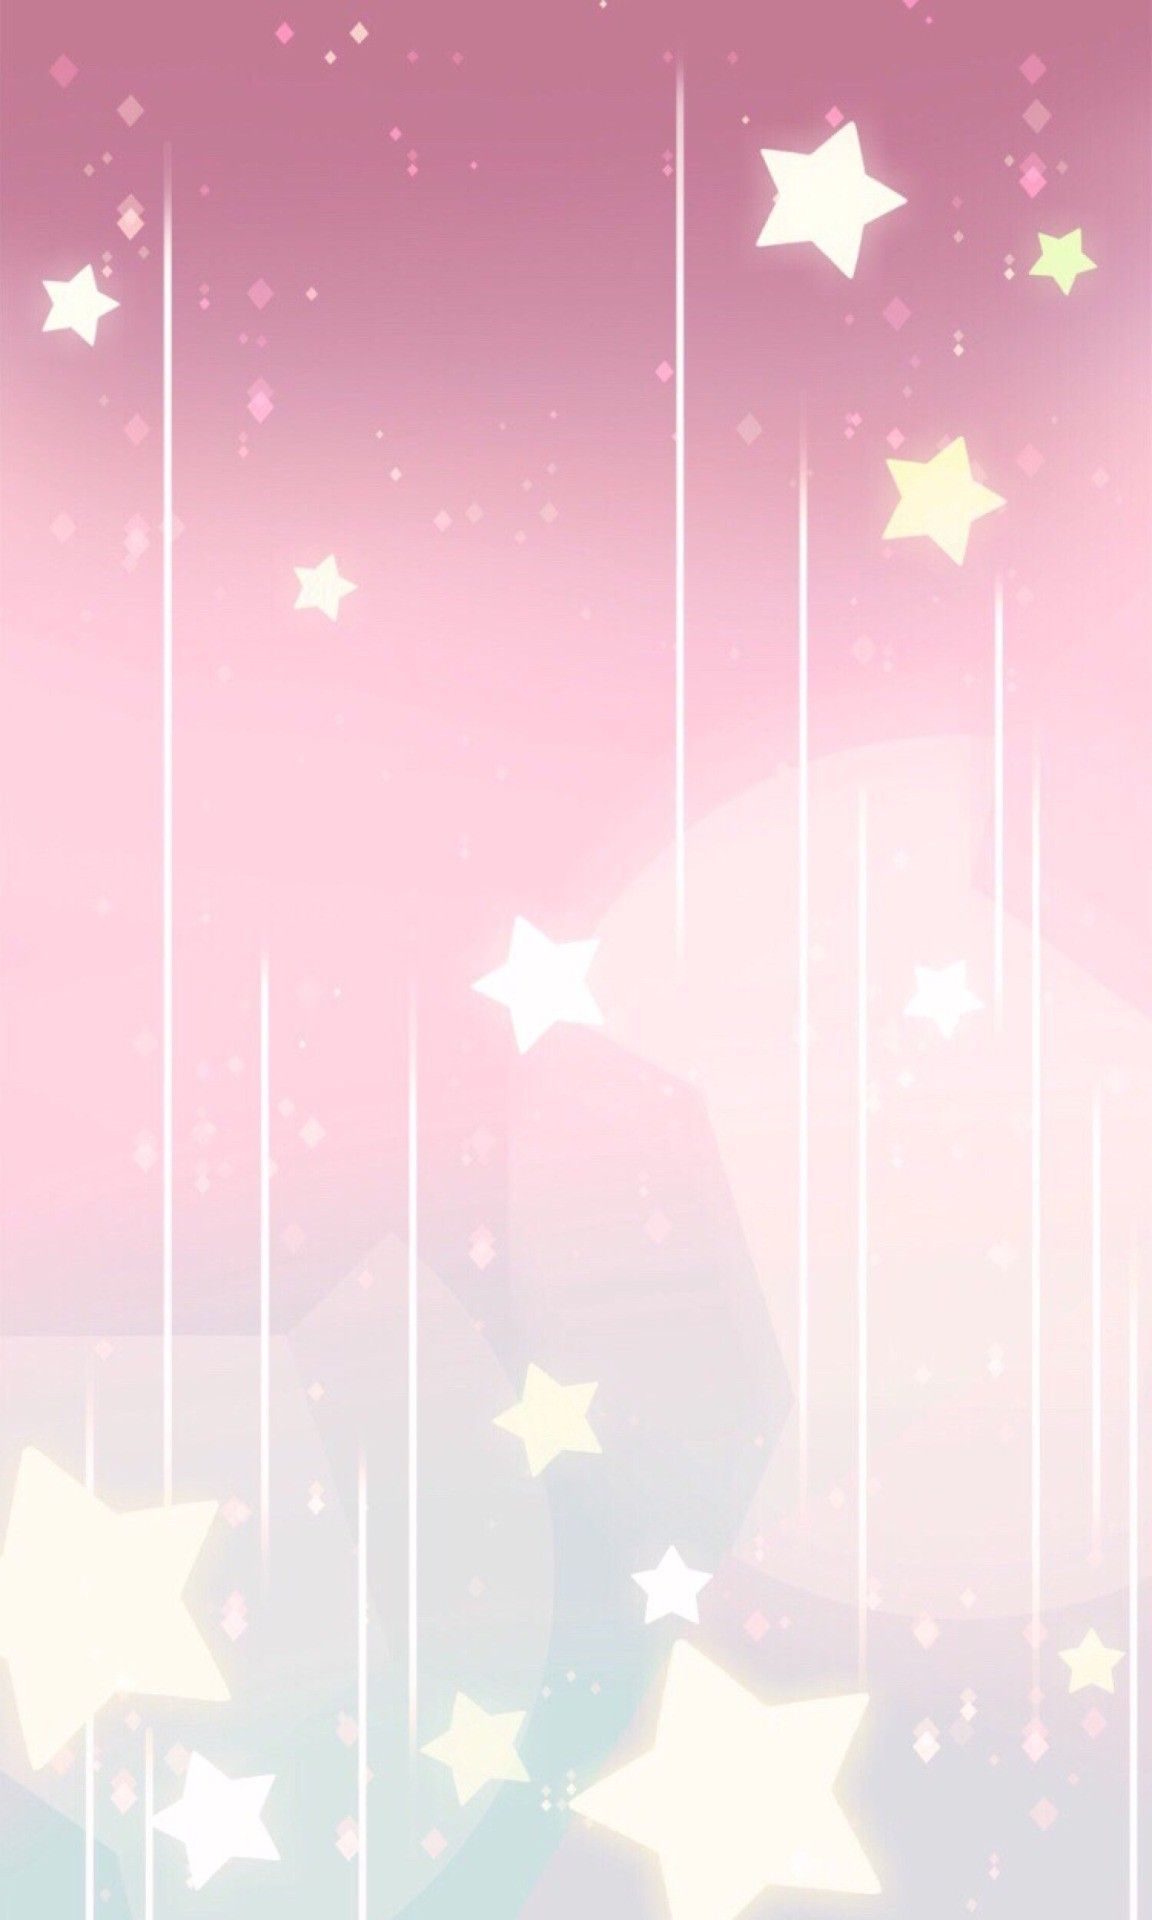 A pink and white starry sky - Cute pink